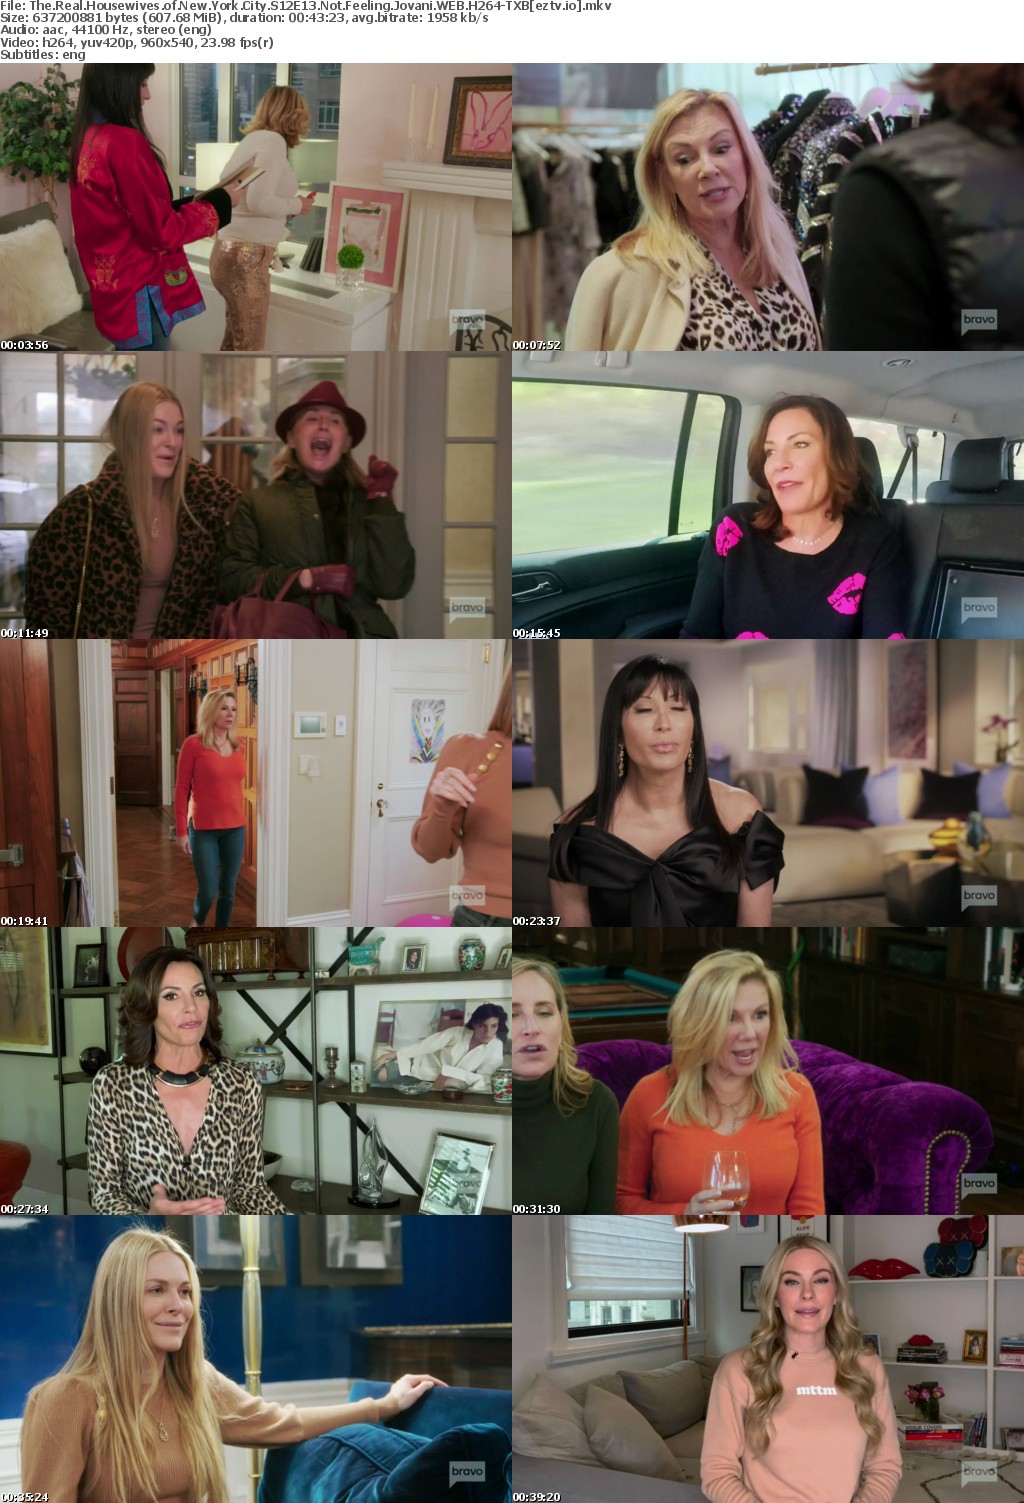 The Real Housewives of New York City S12E13 Not Feeling Jovani WEB H264-TXB